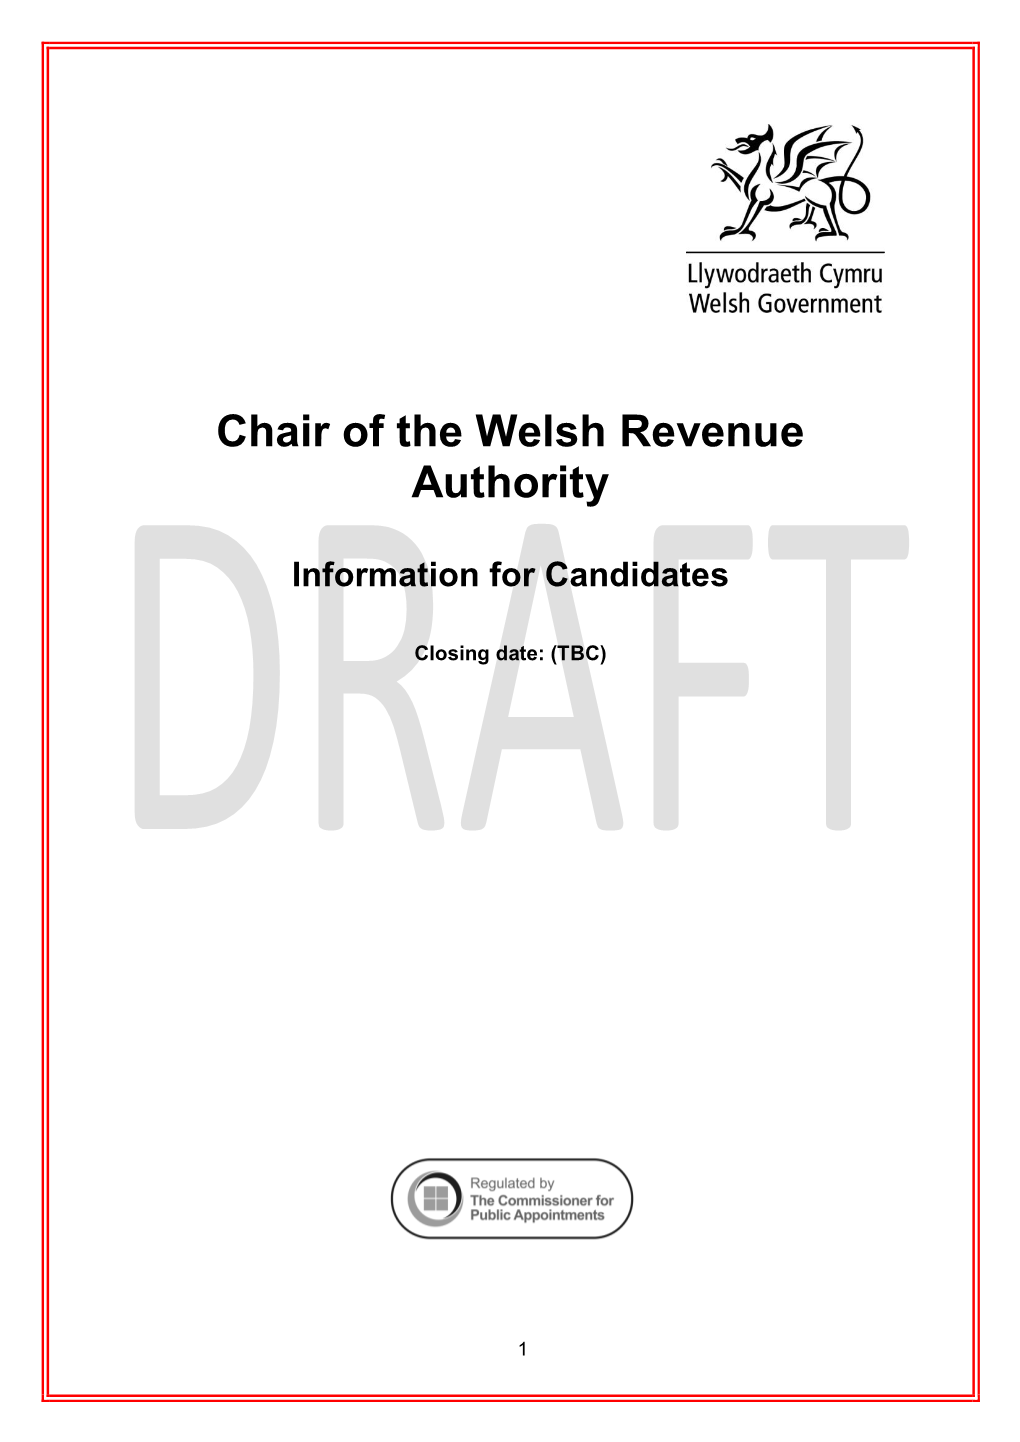 Chair of the Welsh Revenue Authority